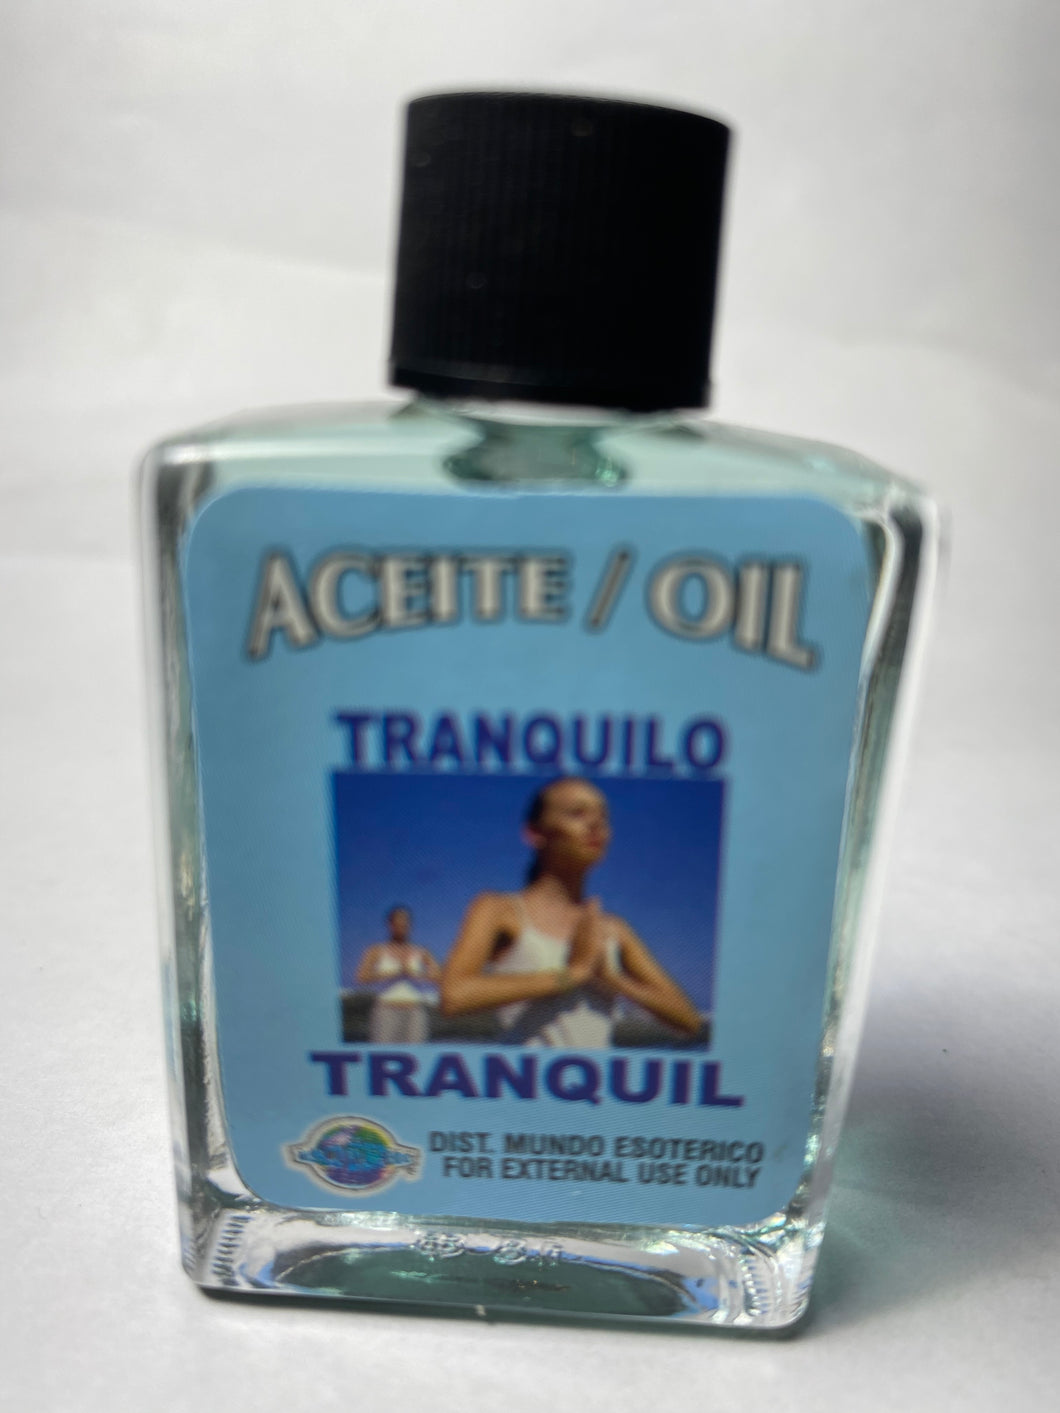 TRANQUIL OIL